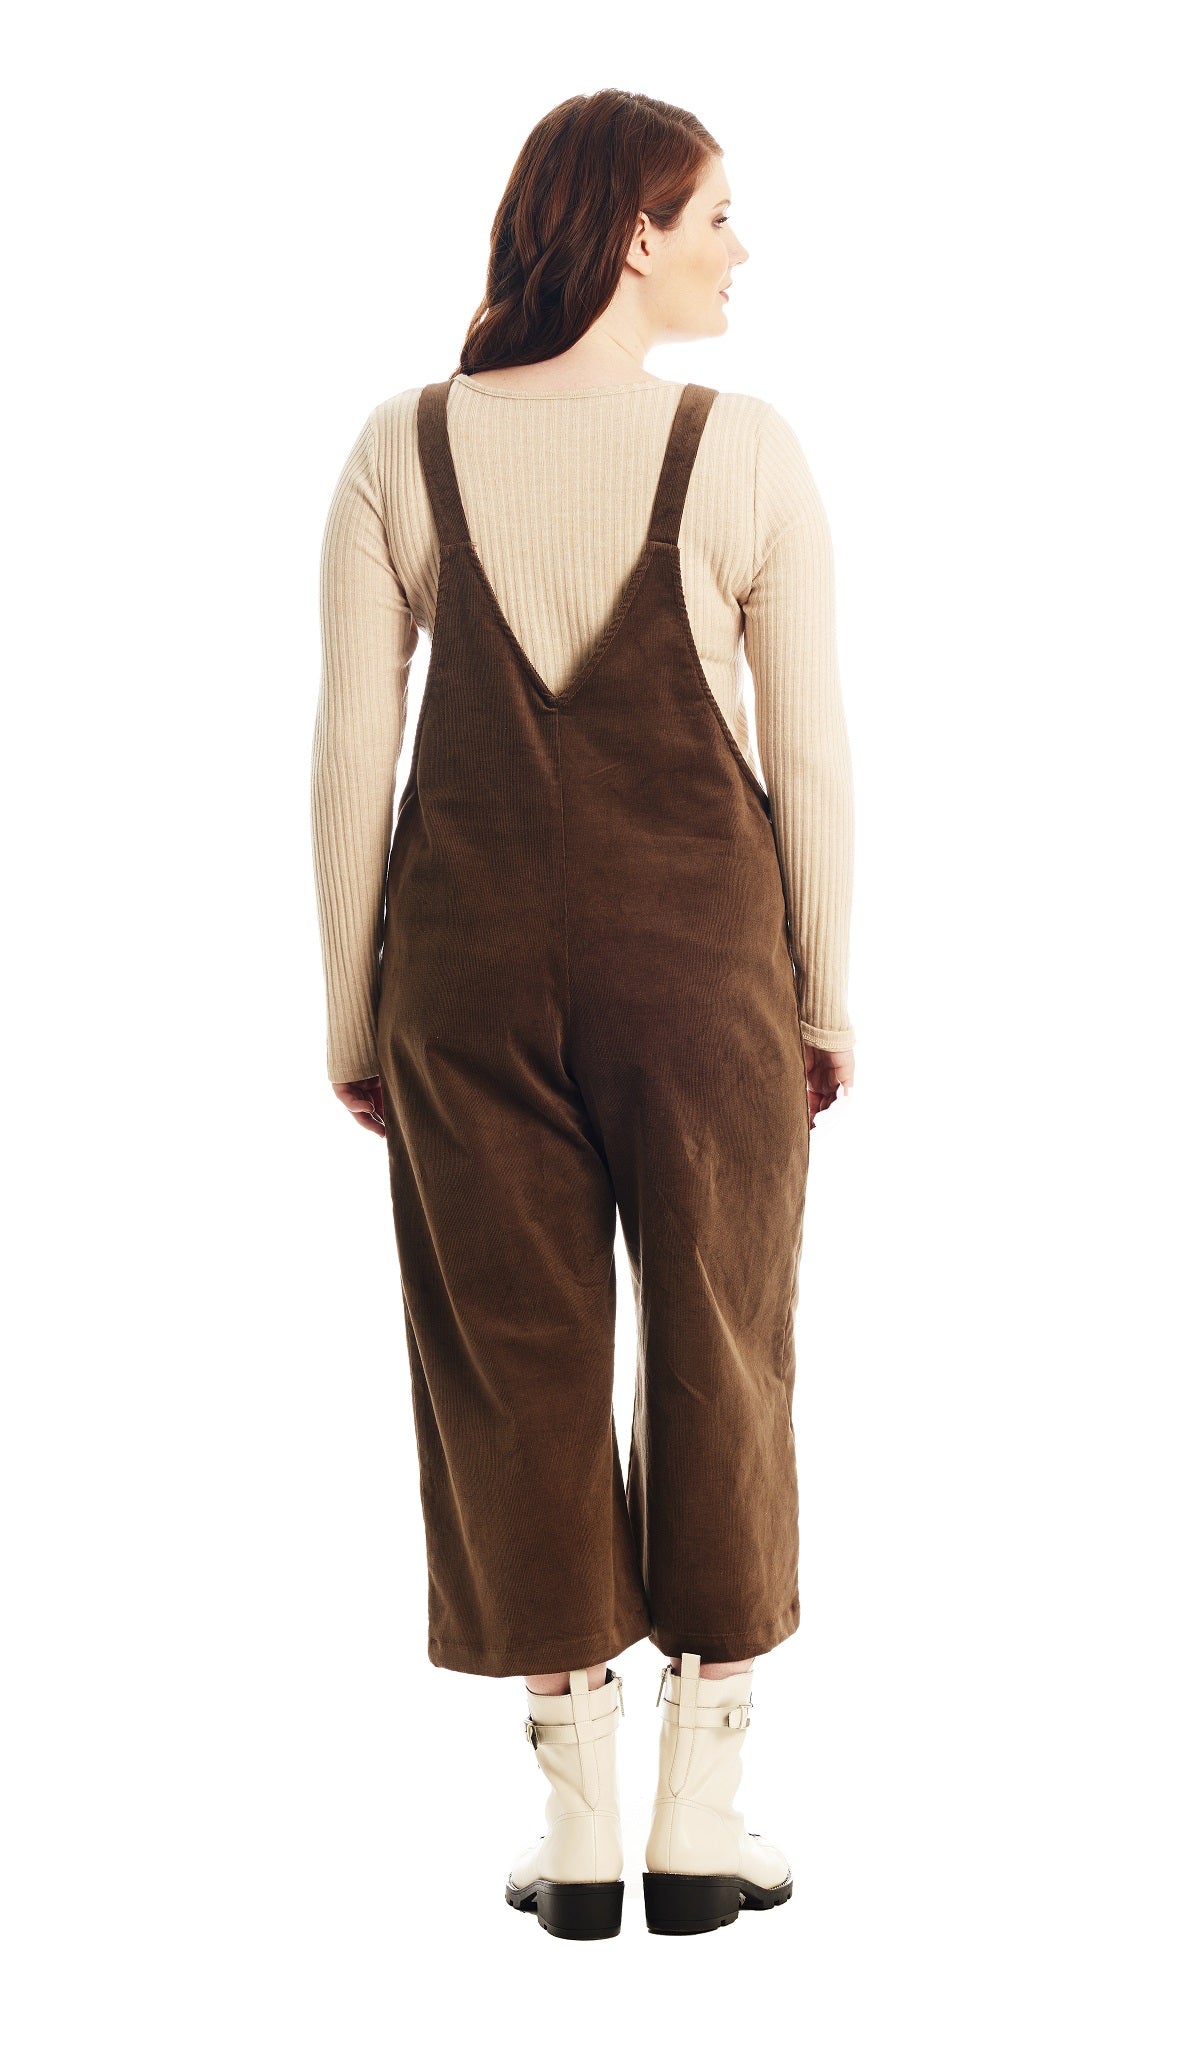 Olive Carlita overall back shot worn by woman with cream boots.